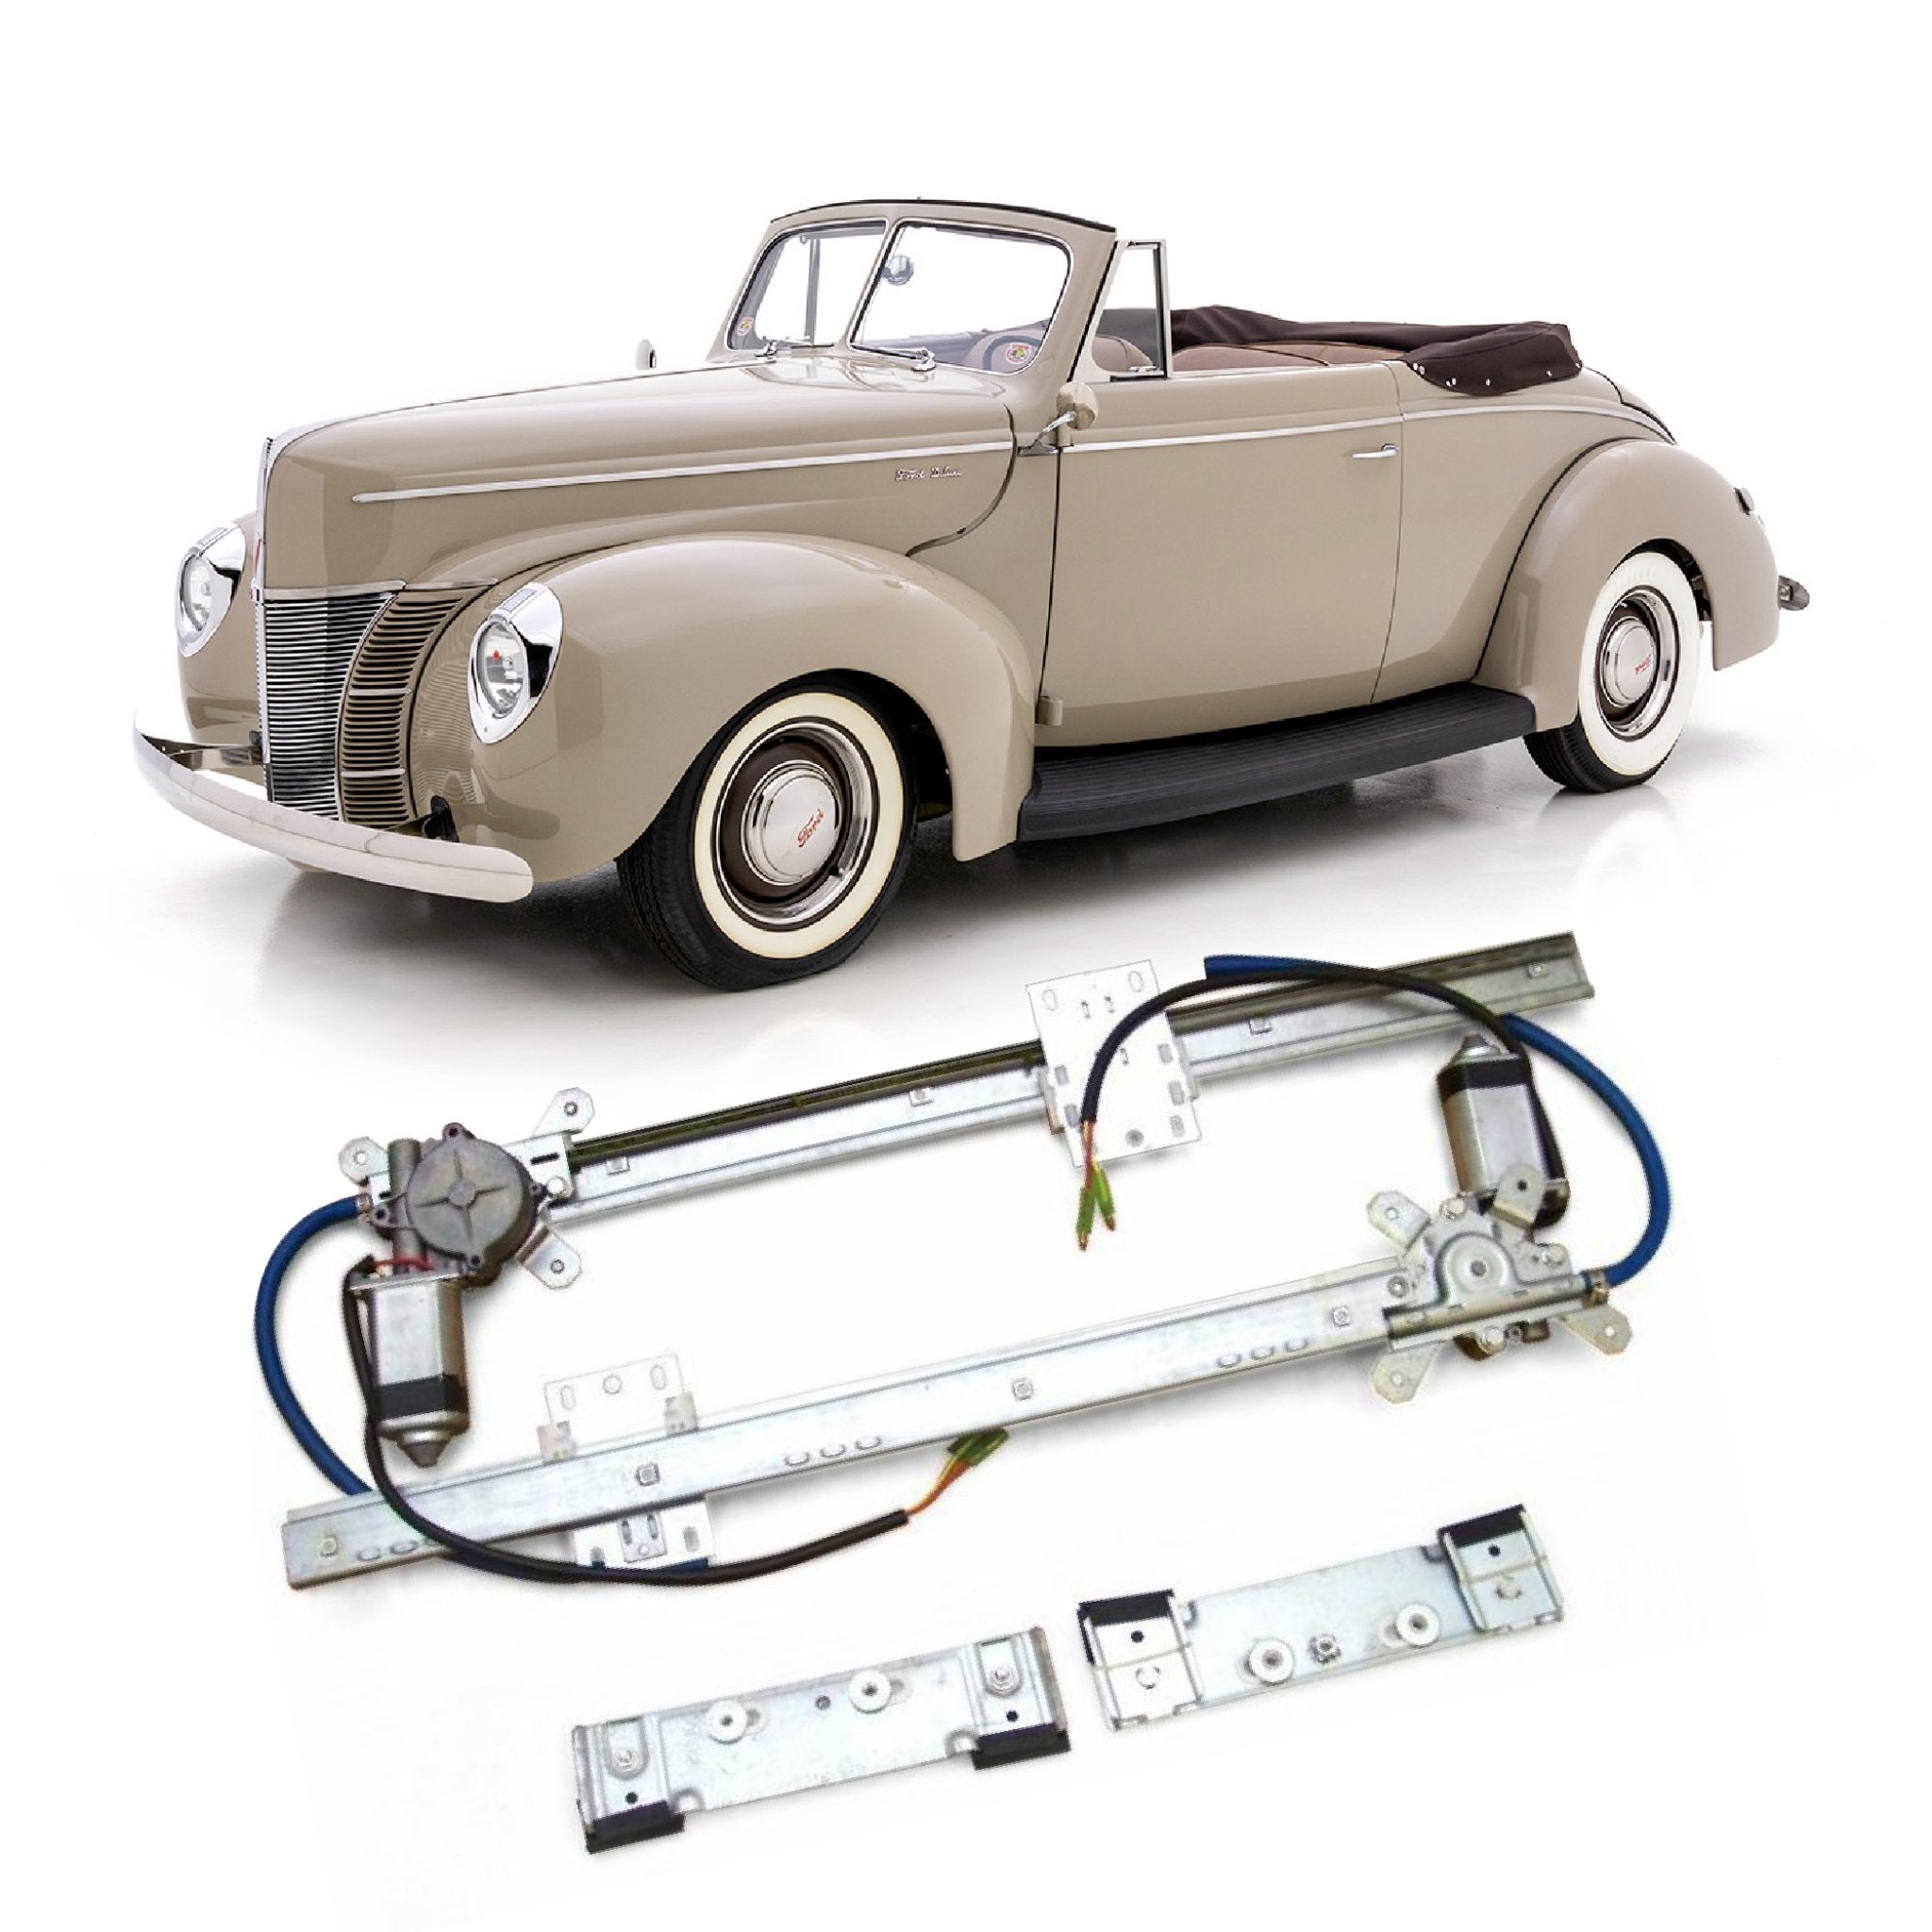 2 Door 12V Power Window Conversion Kit for 1940 Ford Coupe Club Standard Deluxe